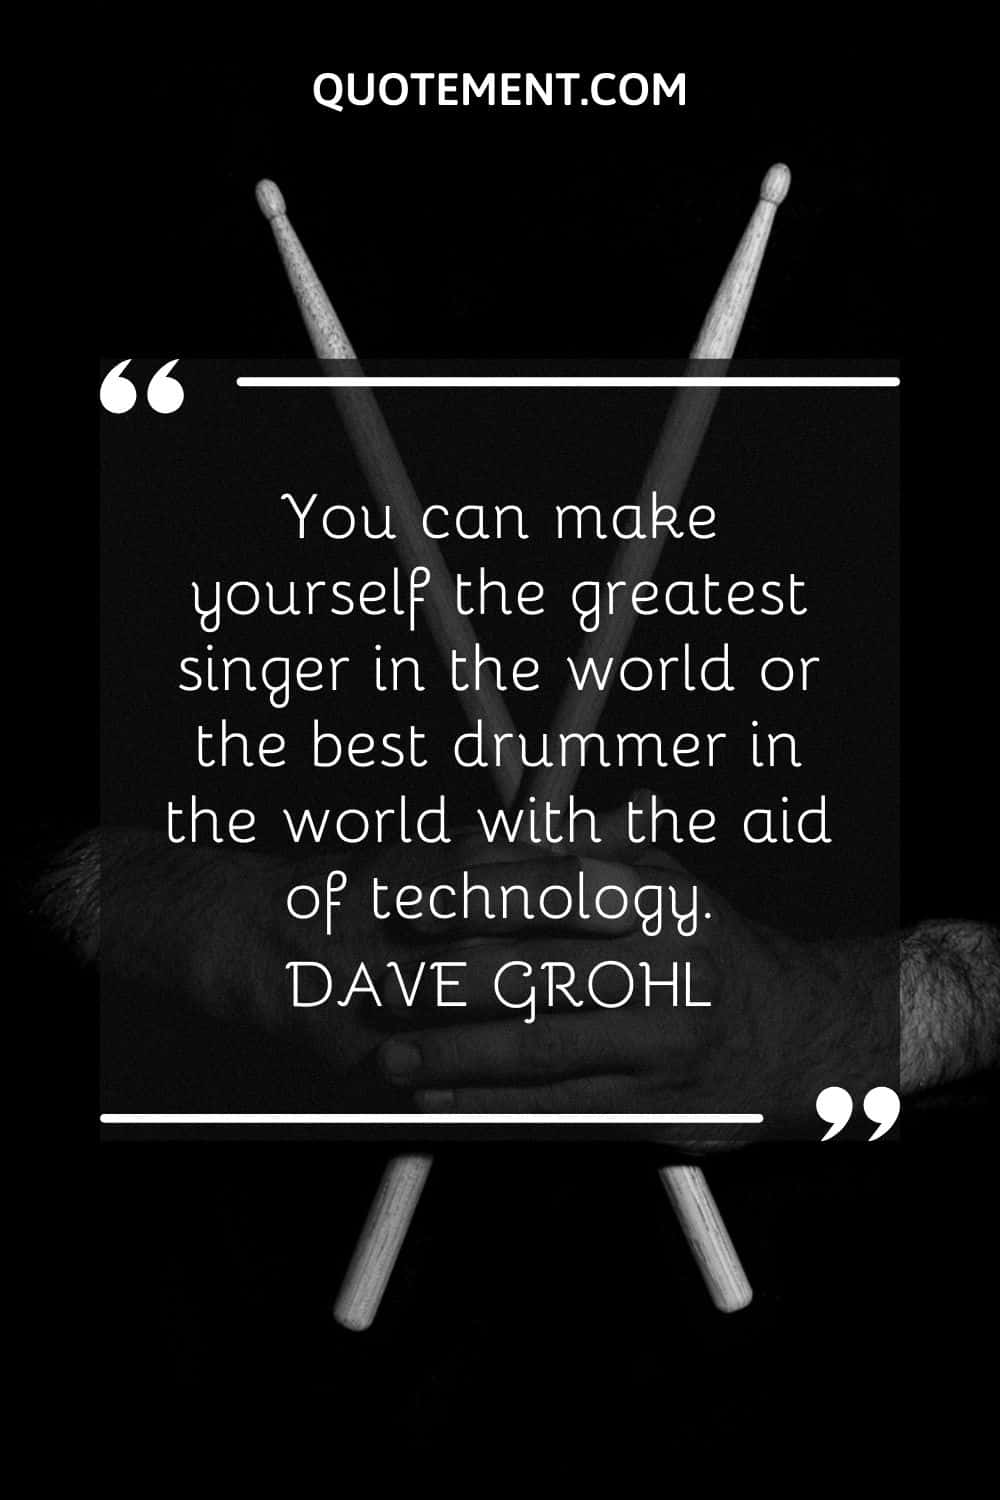 You can make yourself the greatest singer in the world or the best drummer in the world with the aid of technology